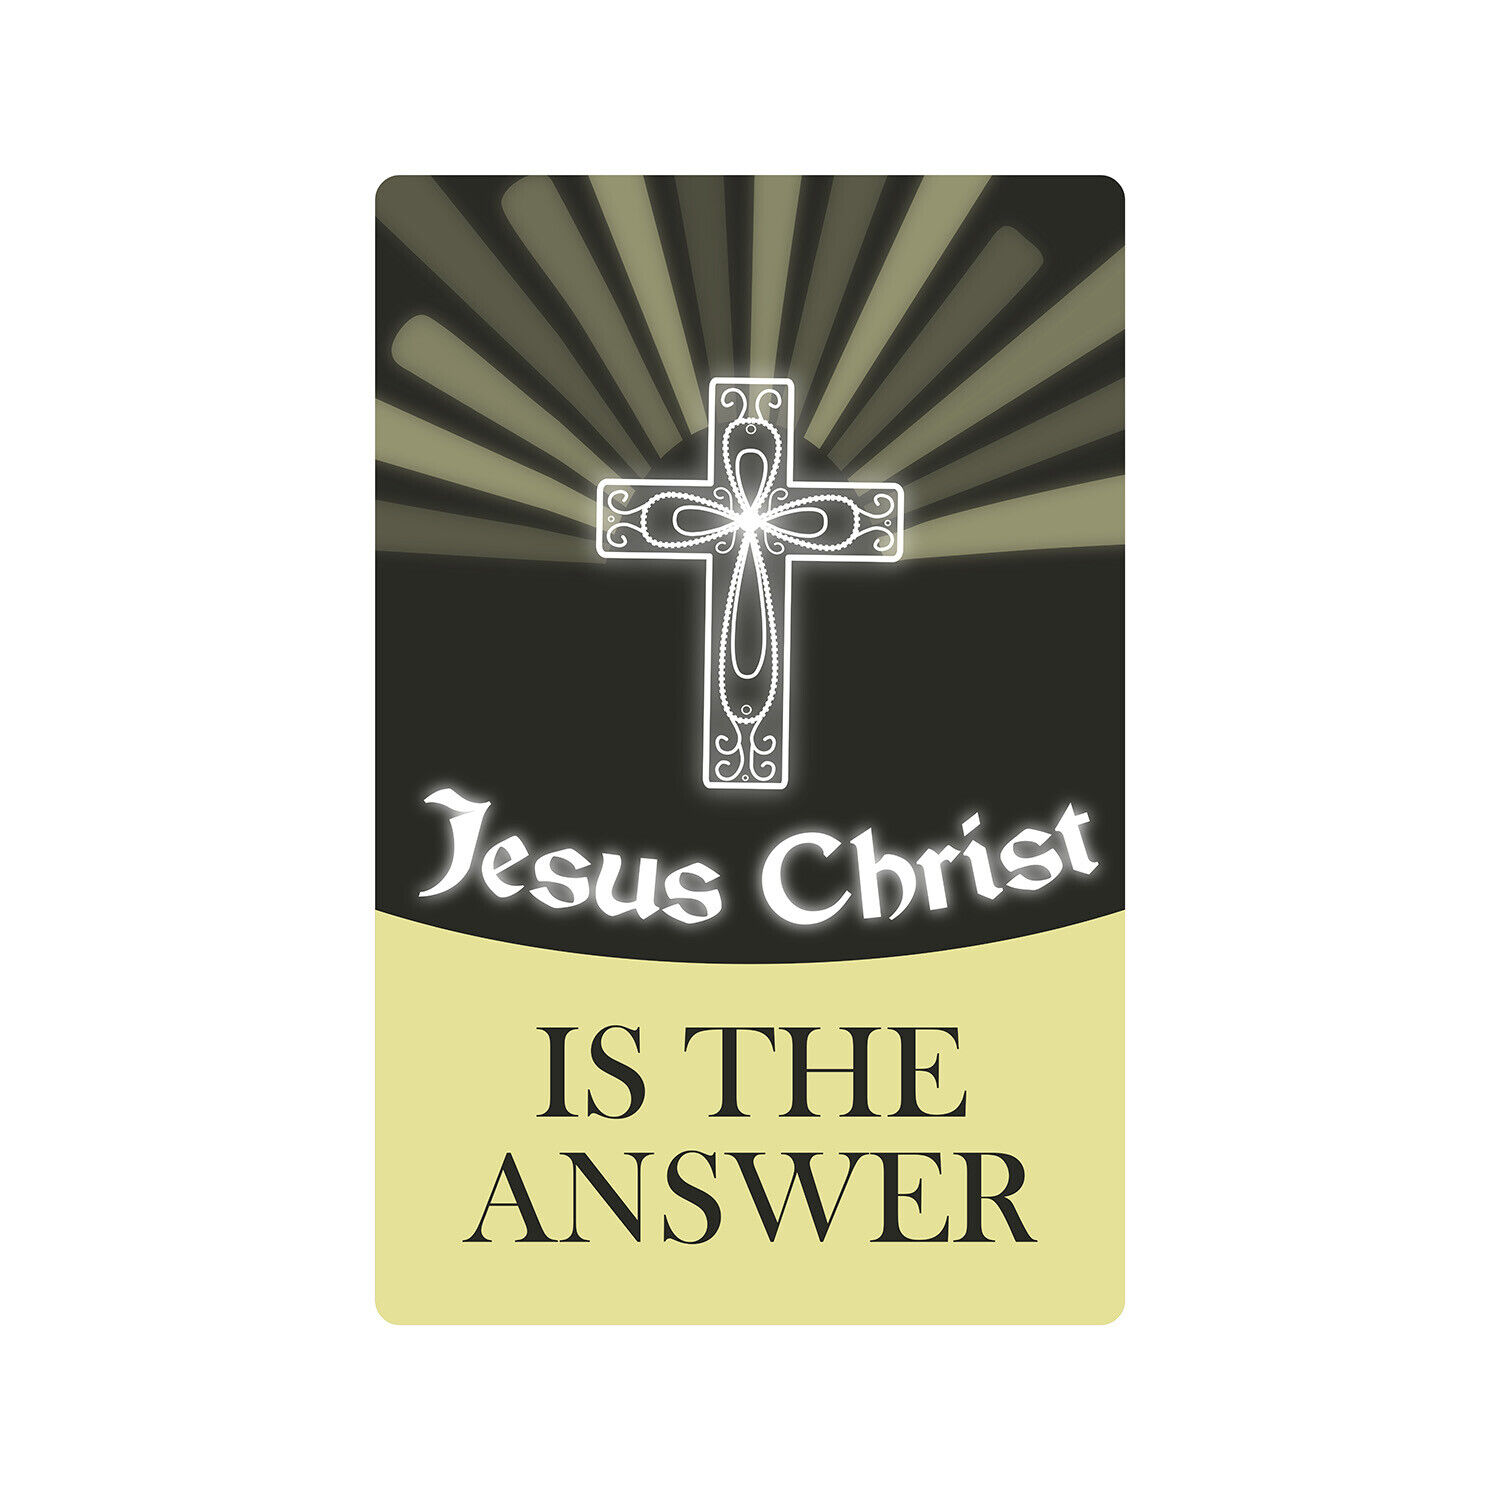 JESUS CHRIST IS THE ANSWER Sign Or Decals religion belief church jesus